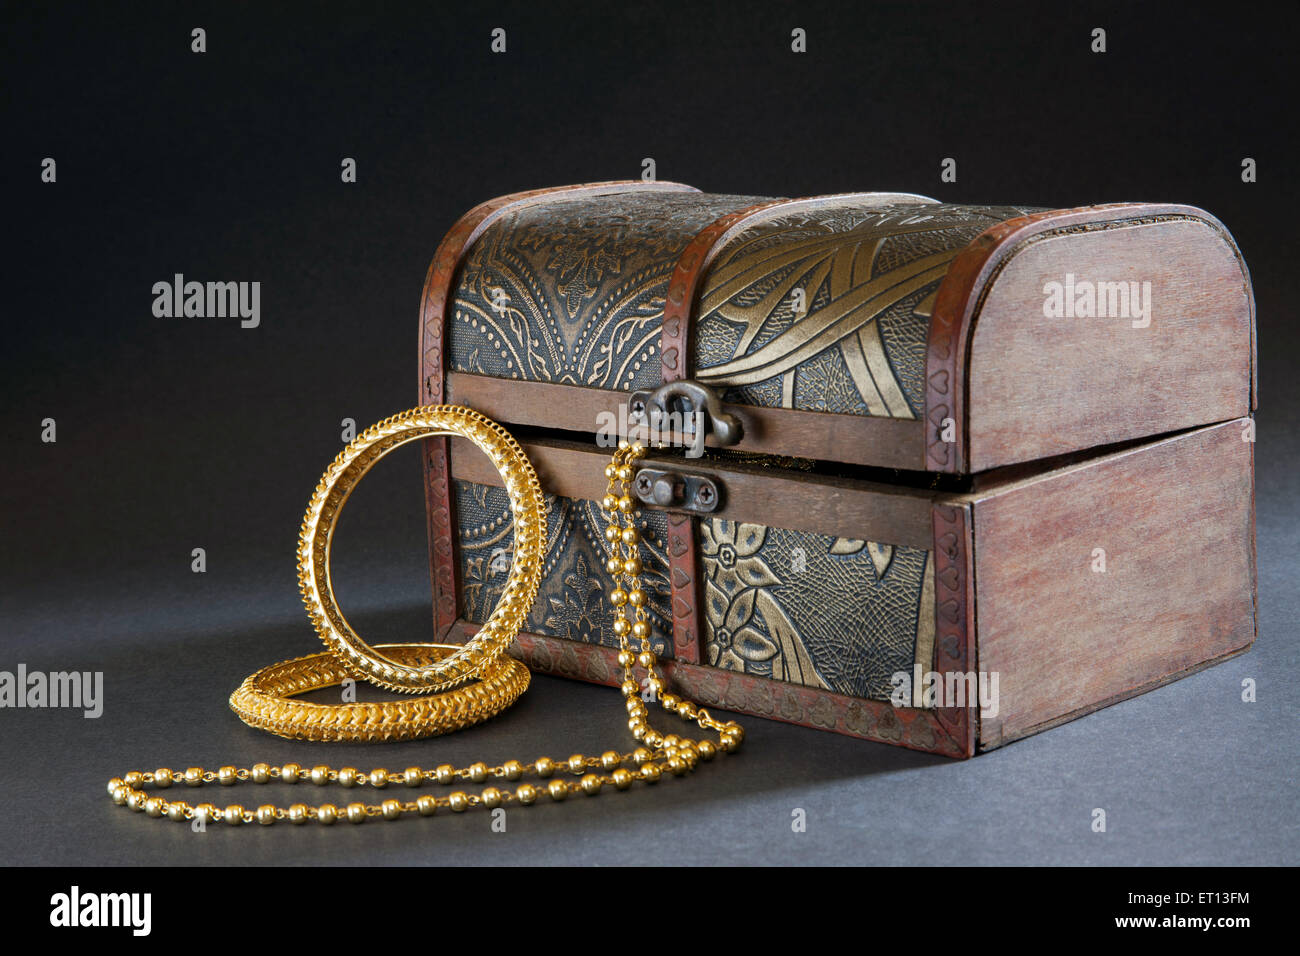 Wooden Jewellery box with Gold Bangles Necklace and Ring India Asia Nove 2011 Stock Photo